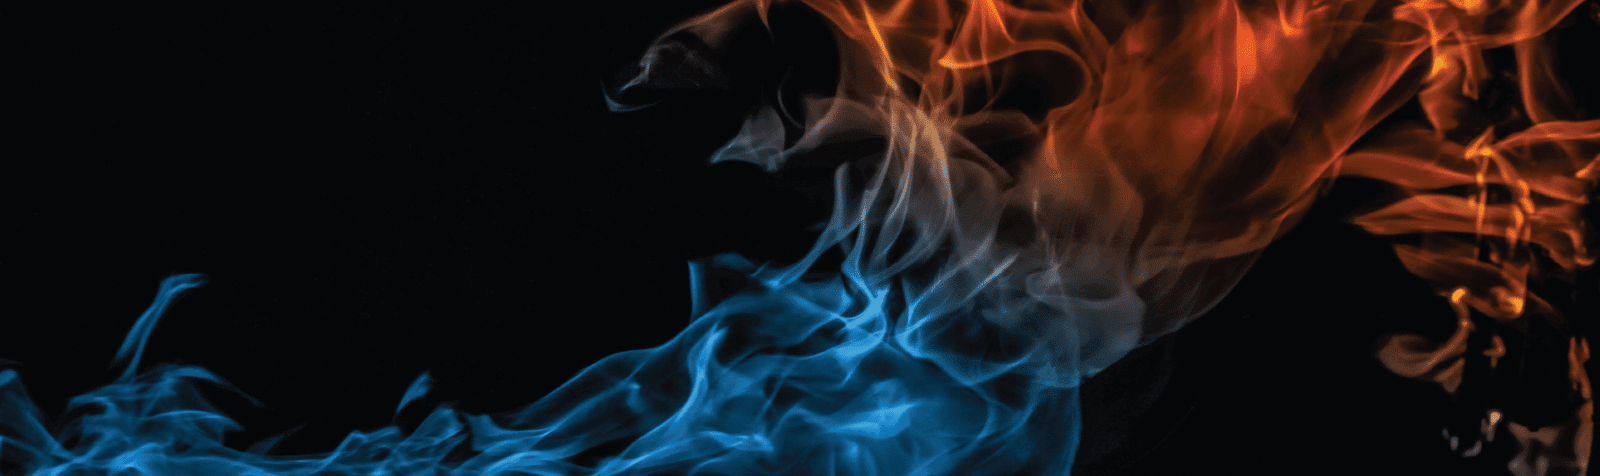 black background with smoke - smoke is a gradient from blue (left side) to red (right side)